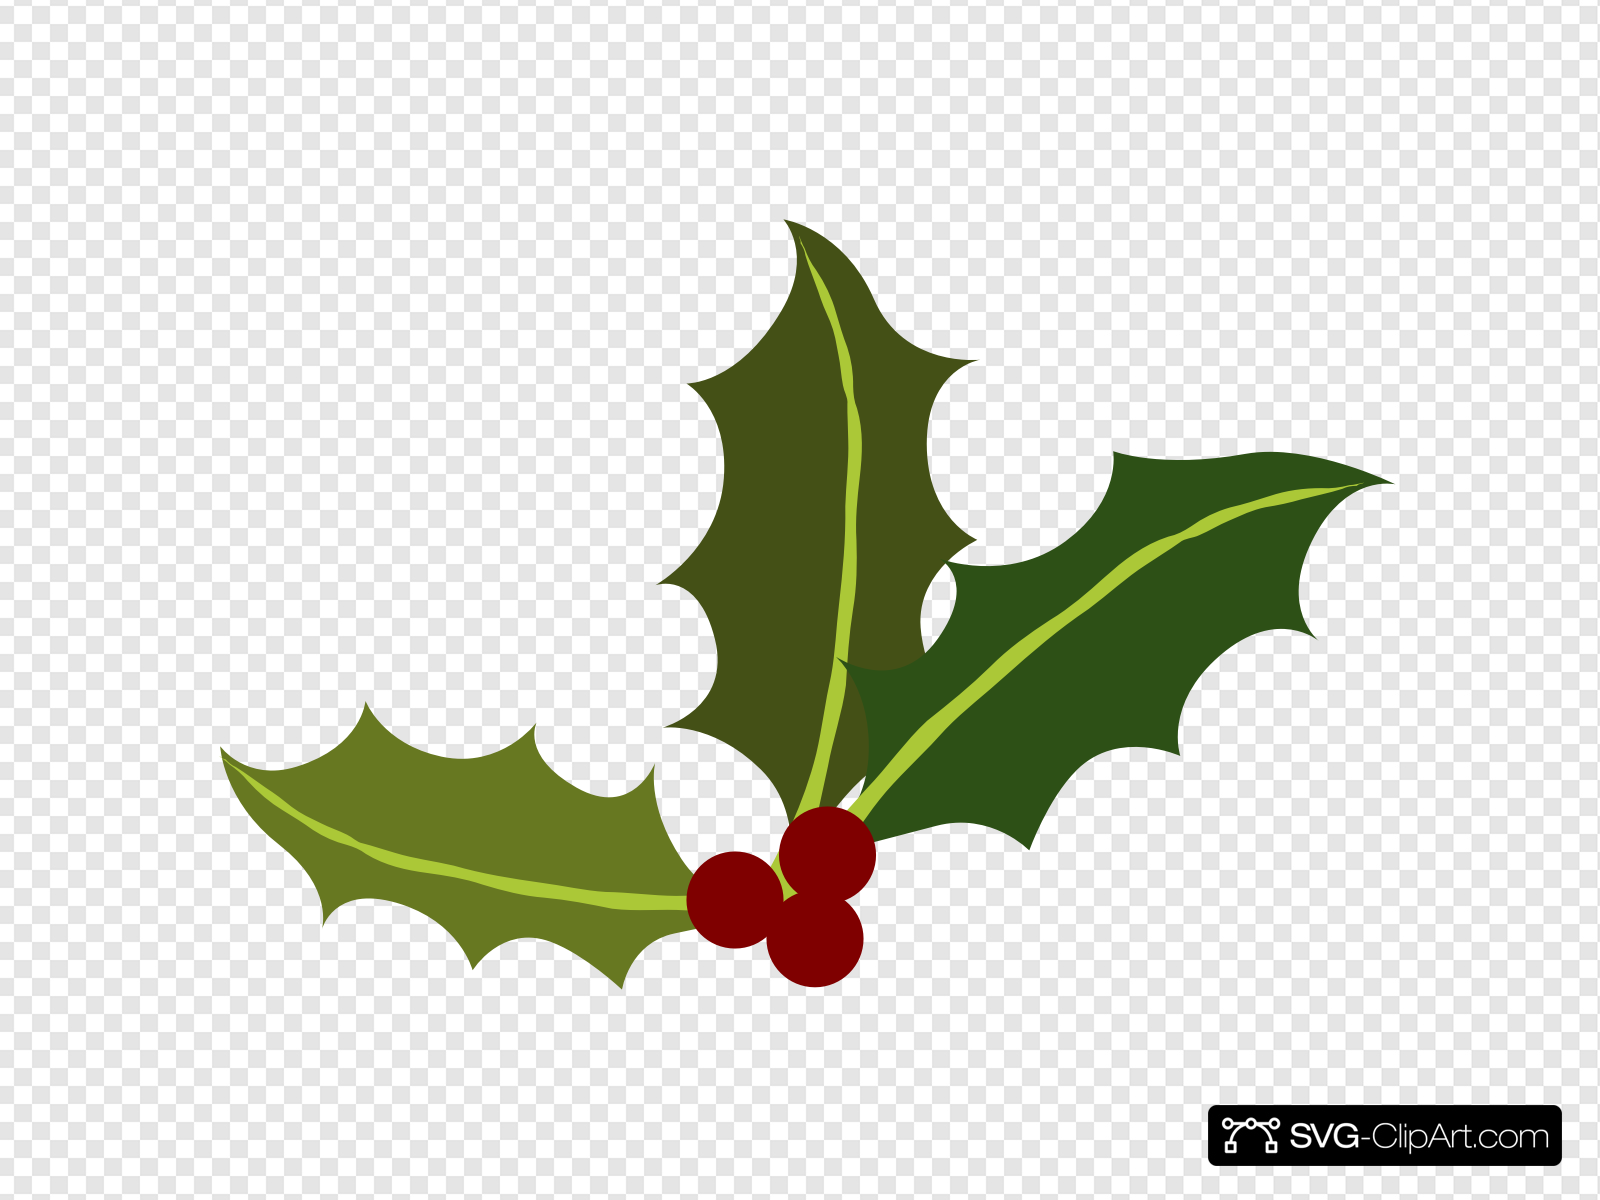 Holly Leaves With Berries Clip art, Icon and SVG.